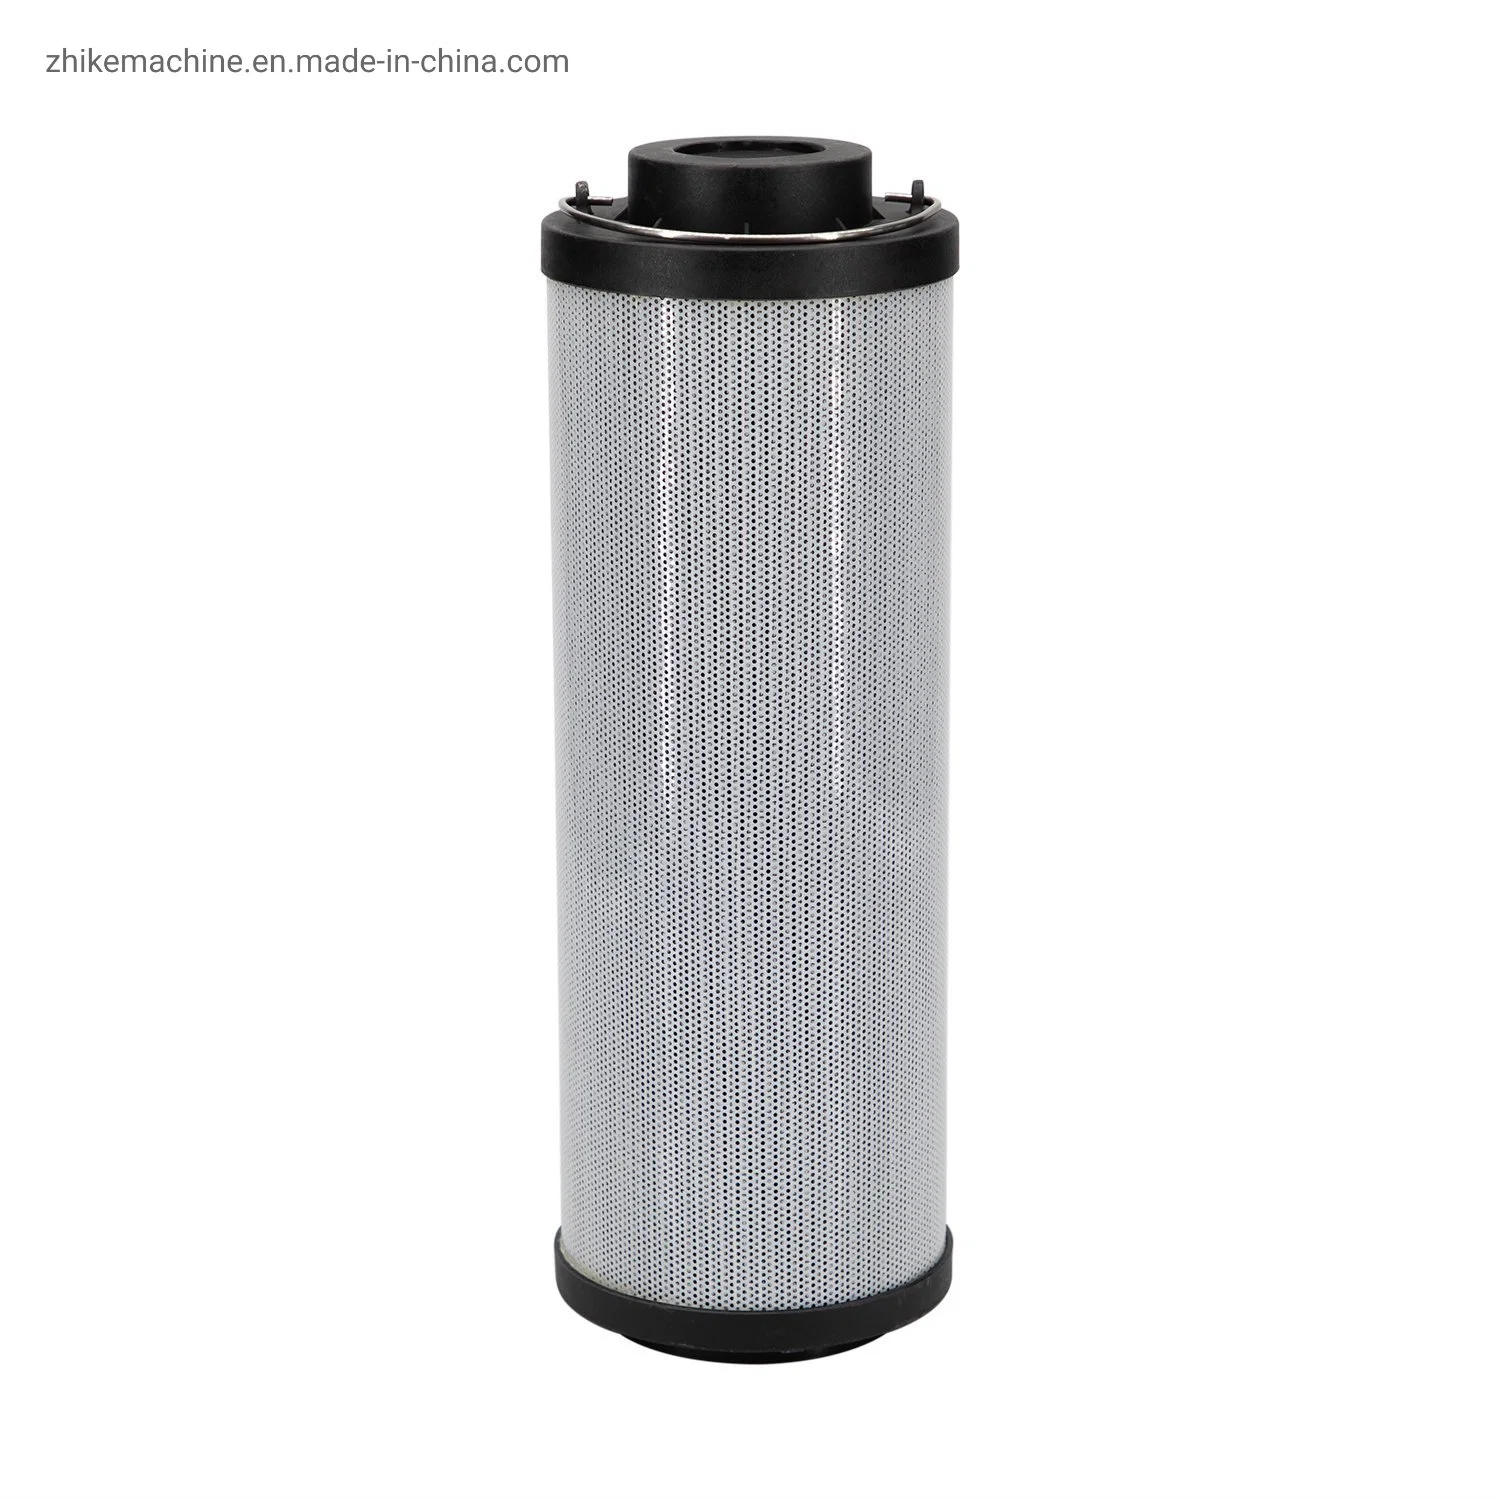 Auto Transmission Oil Filters for Haice Txl 4y